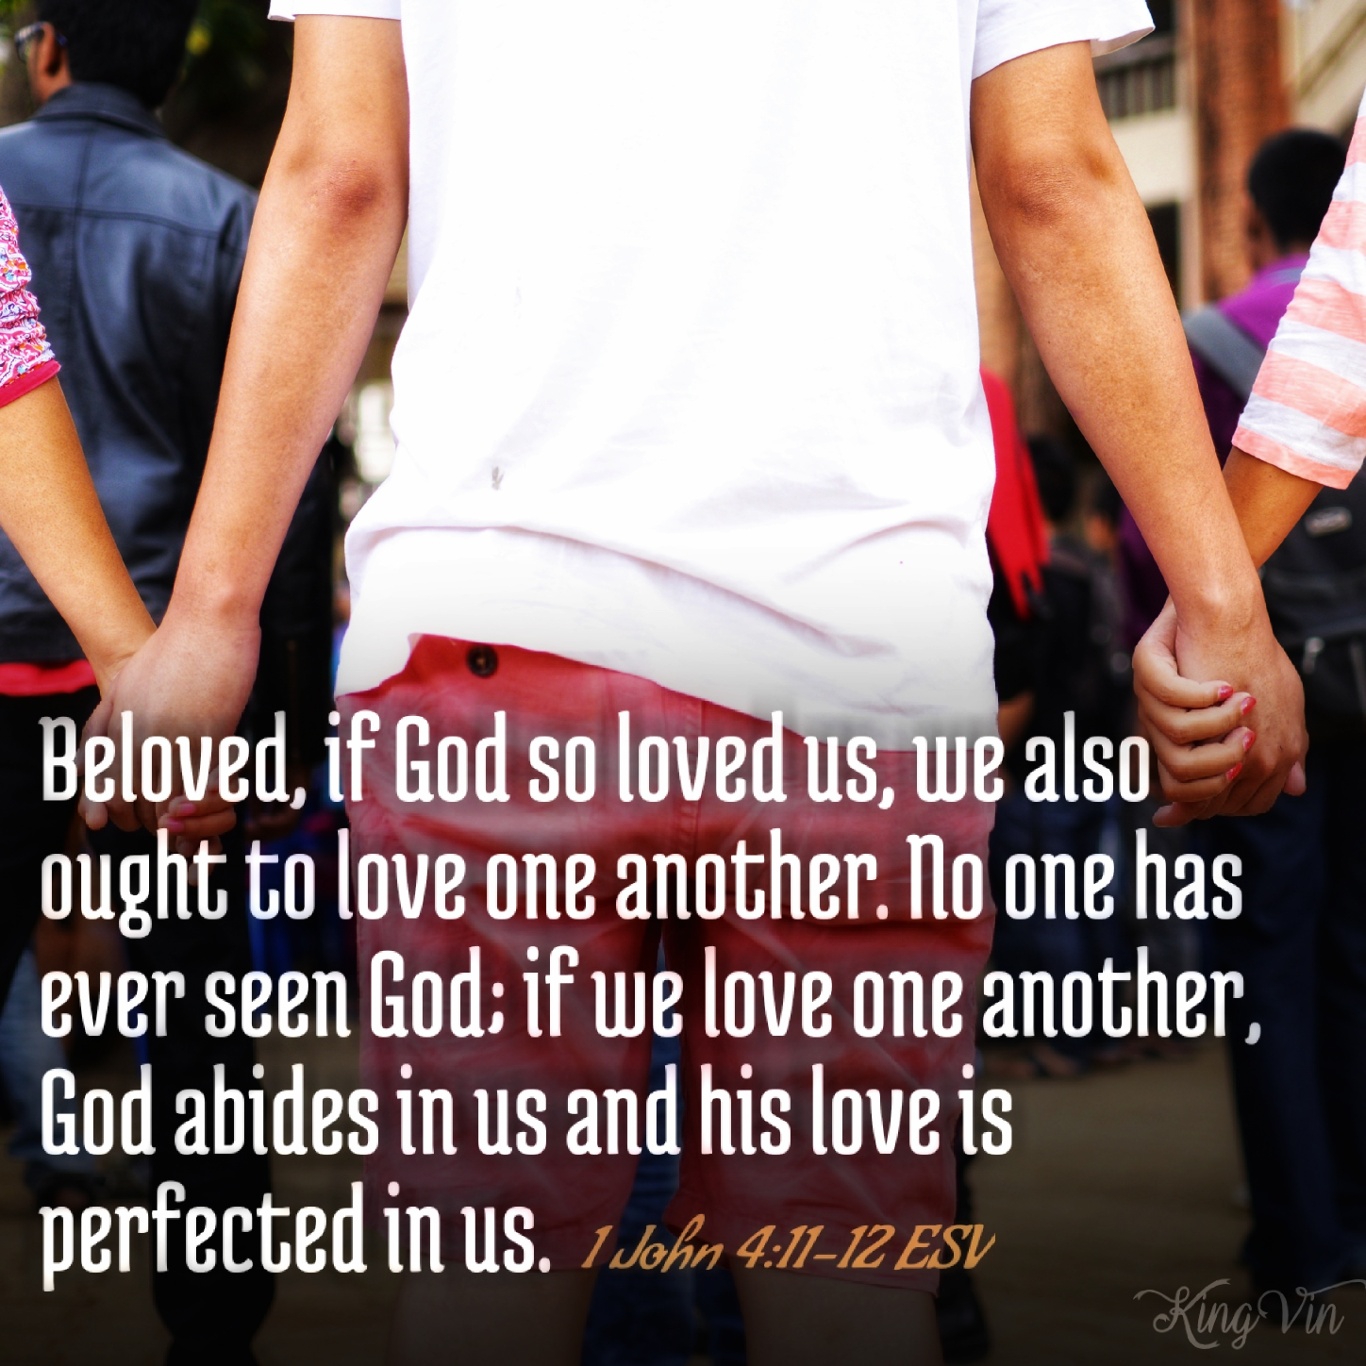 Beloved, if God so loved us, we also ought to love one another. No one has ever seen God; if we love one another, God abides in us and his love is perfected in us. 1 John 4:11‭-‬12 ESV